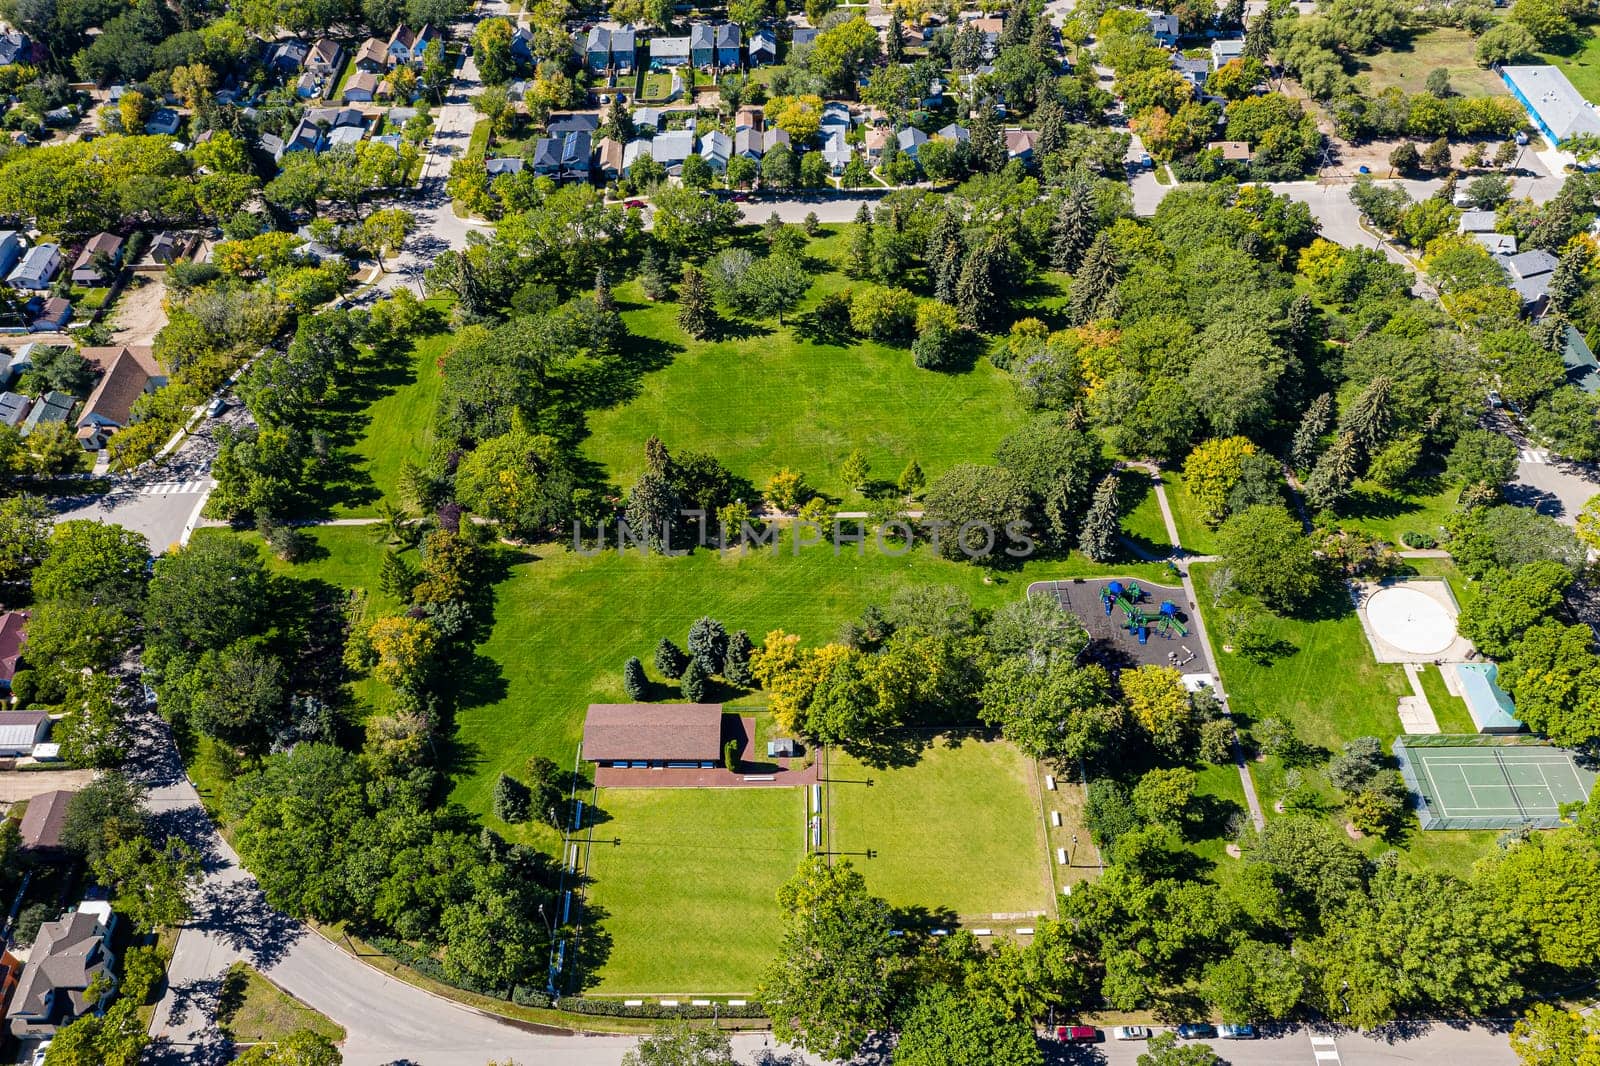 Discover the beauty of Ashworth Holmes Park in Saskatoon. This image showcases its sprawling lawns, vibrant playground, and inviting picnic spots, a beloved urban green space for all ages.